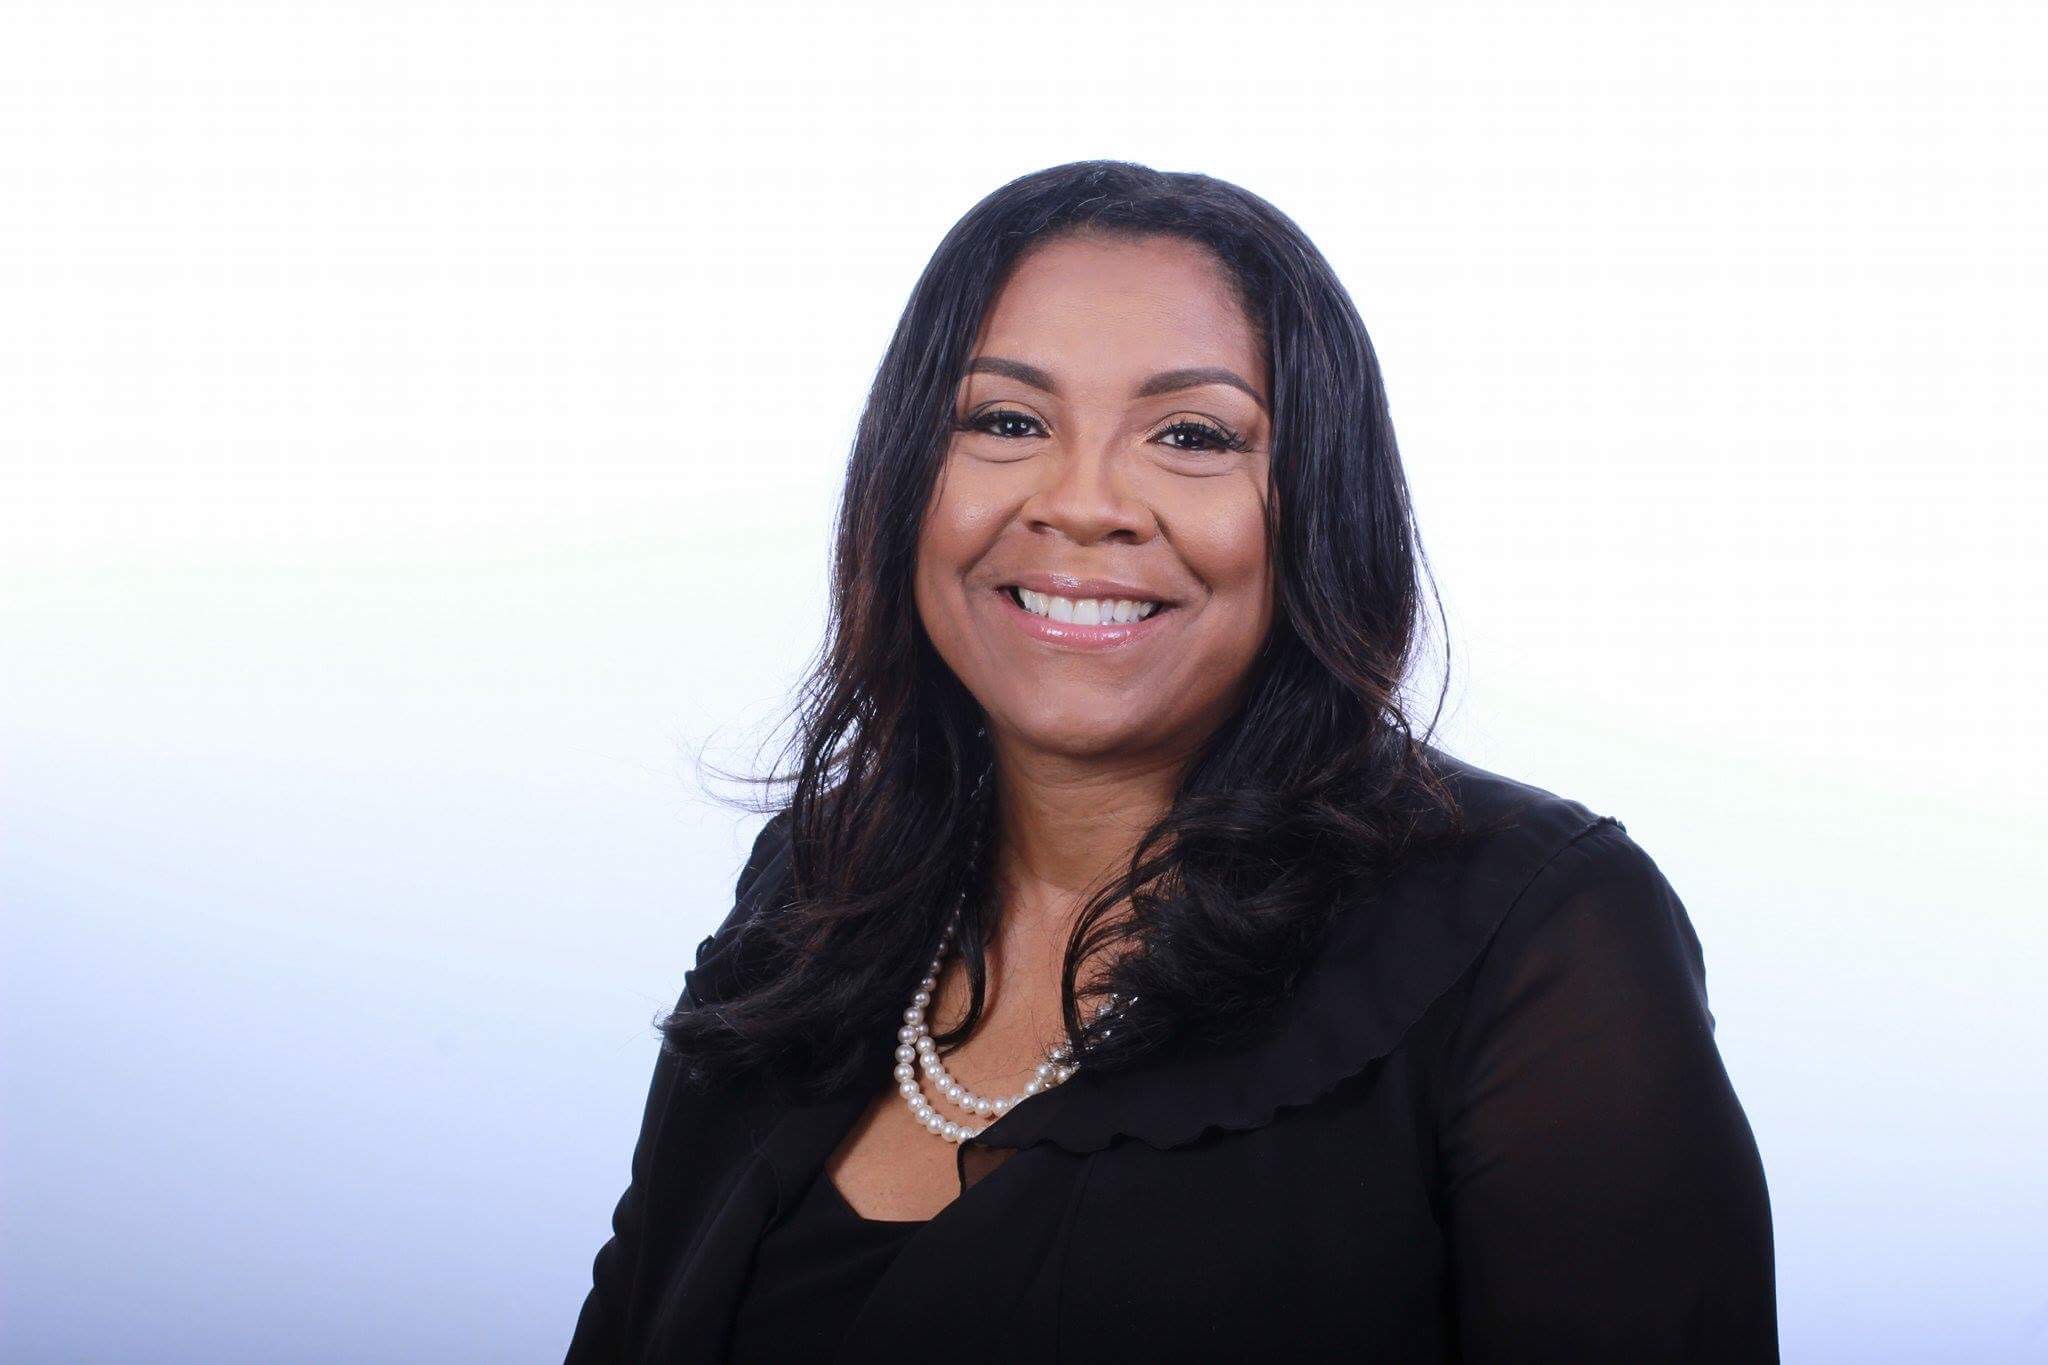 Maxine Griffin Somerville, MPA, SPHR, SHRM-SCP